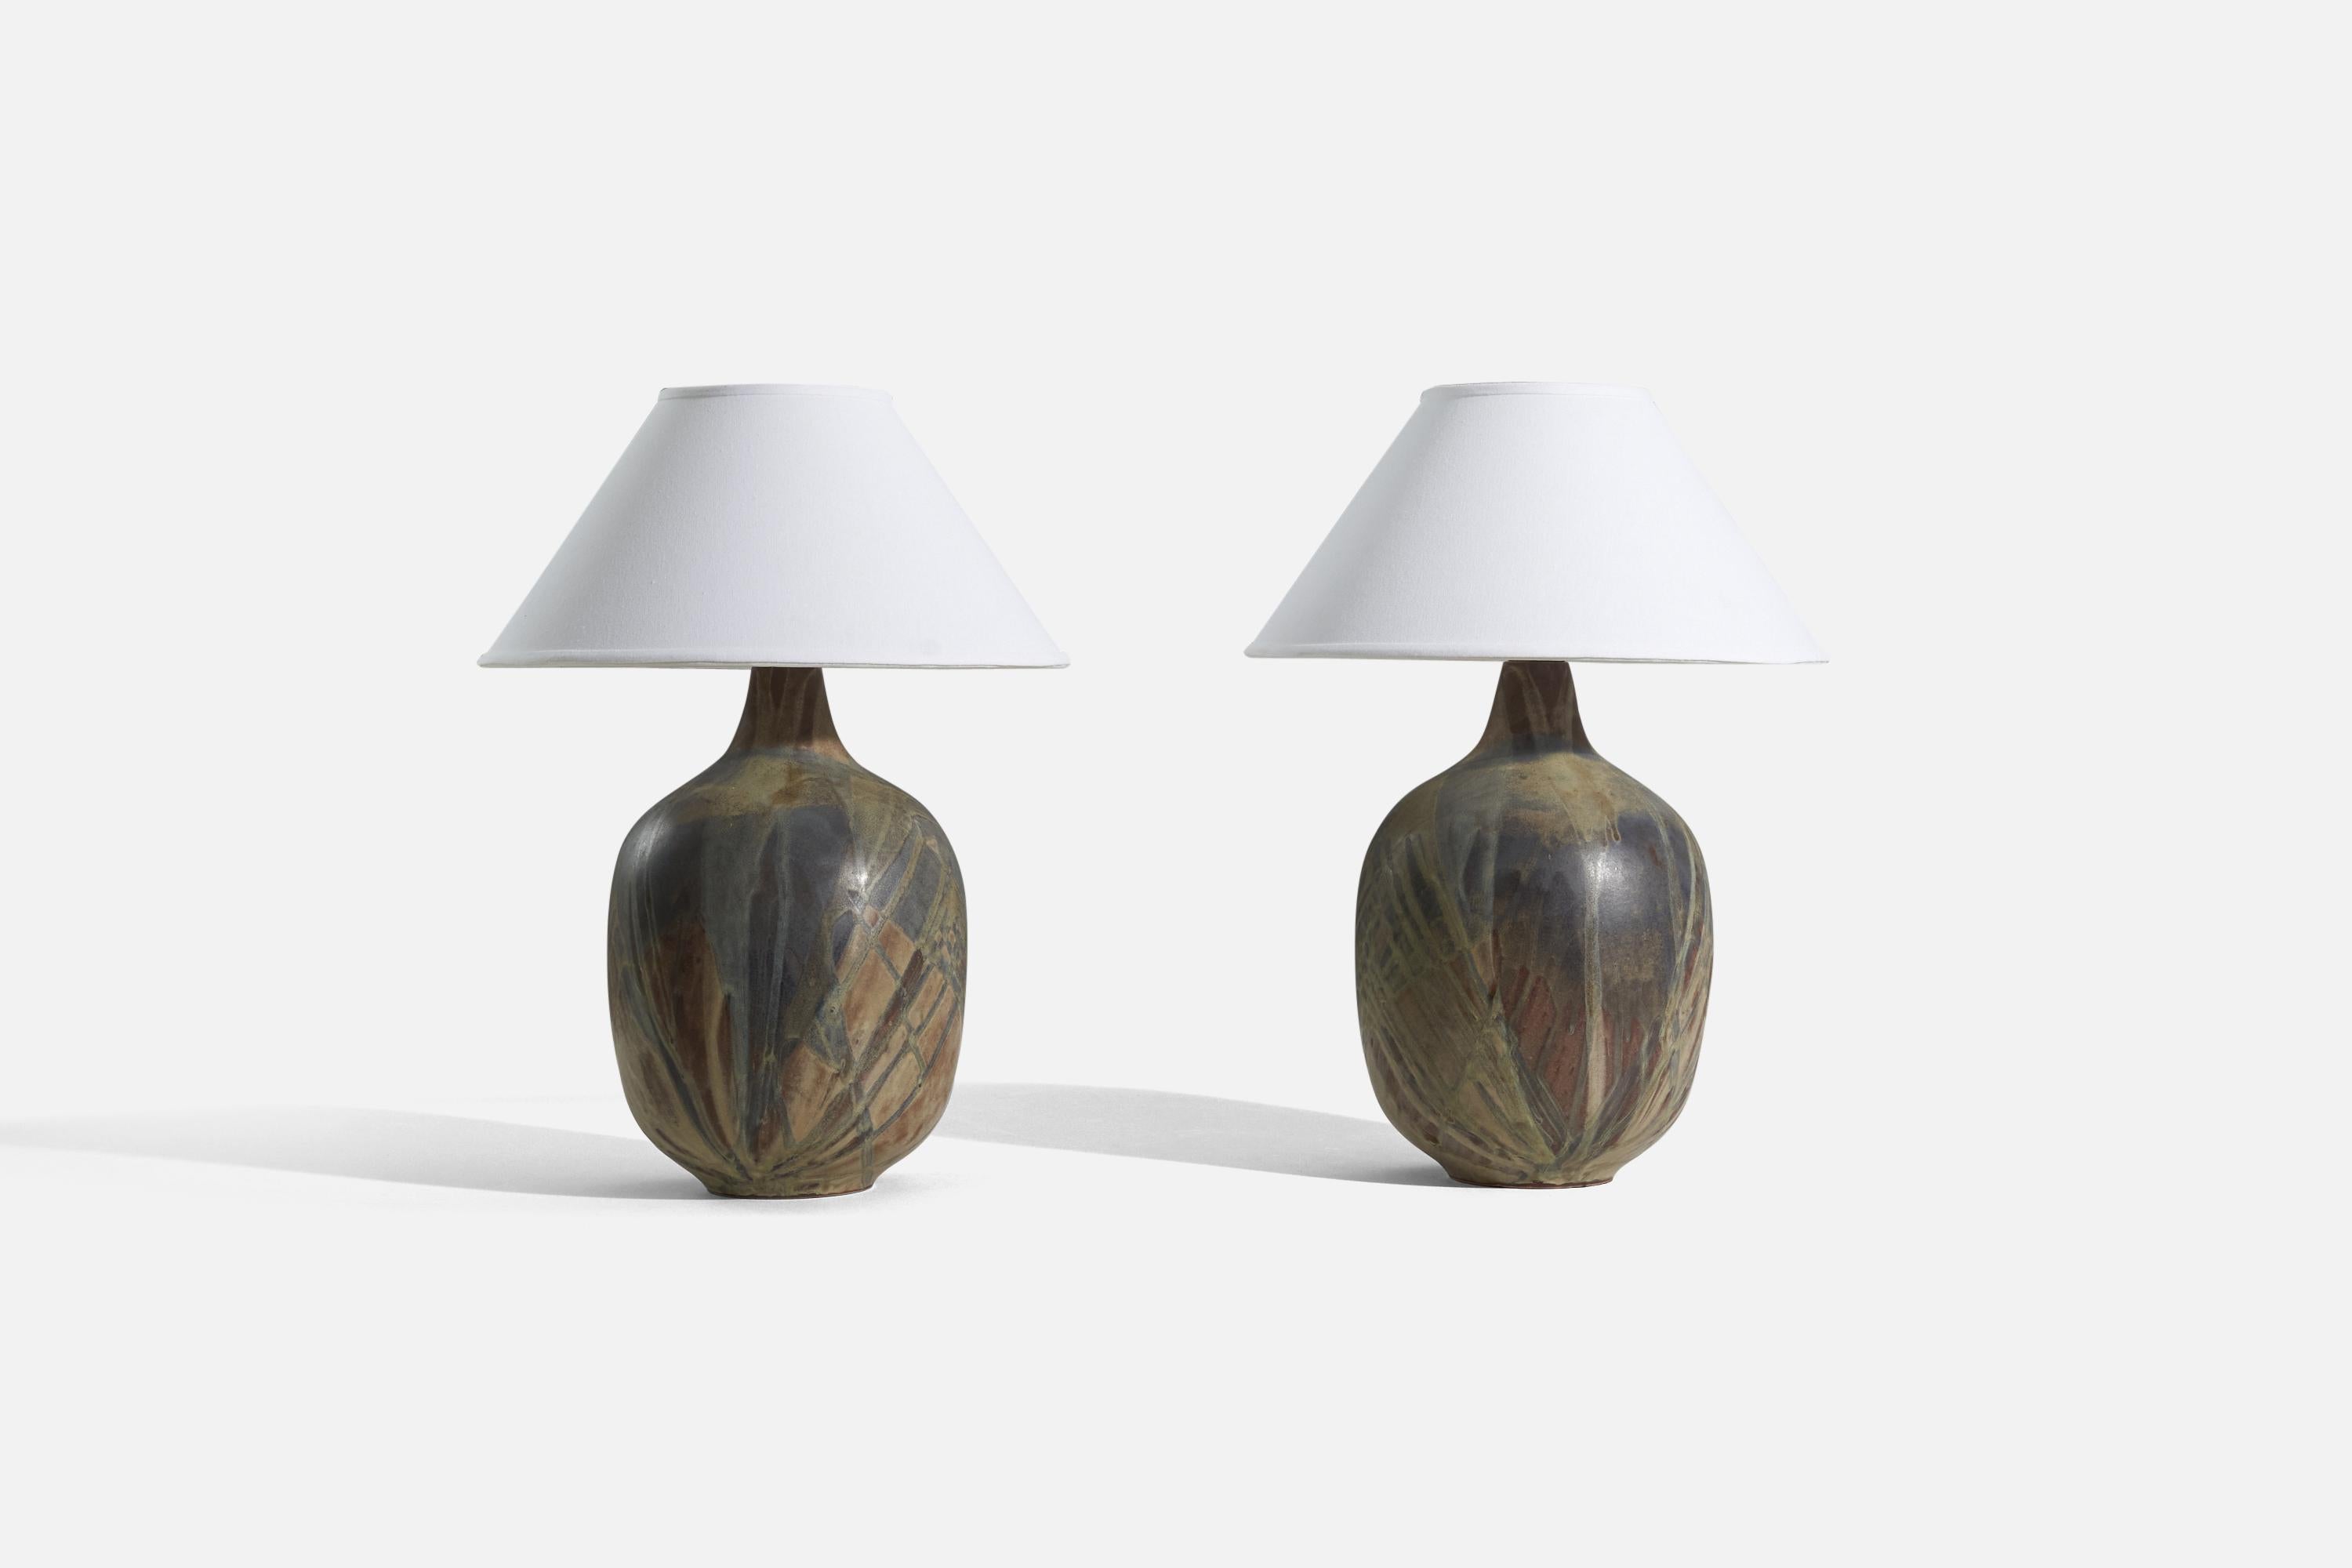 A pair of large ceramic table lamps designed and produced in United States, 1960s.

Sold without lampshade. 
Dimensions of Lamp (inches) : 19 x 9.25 x 9.25 (H x W x D)
Dimensions of Shade (inches) : 6 x 16 x 9.25 (T x B x H)
Dimension of Lamp